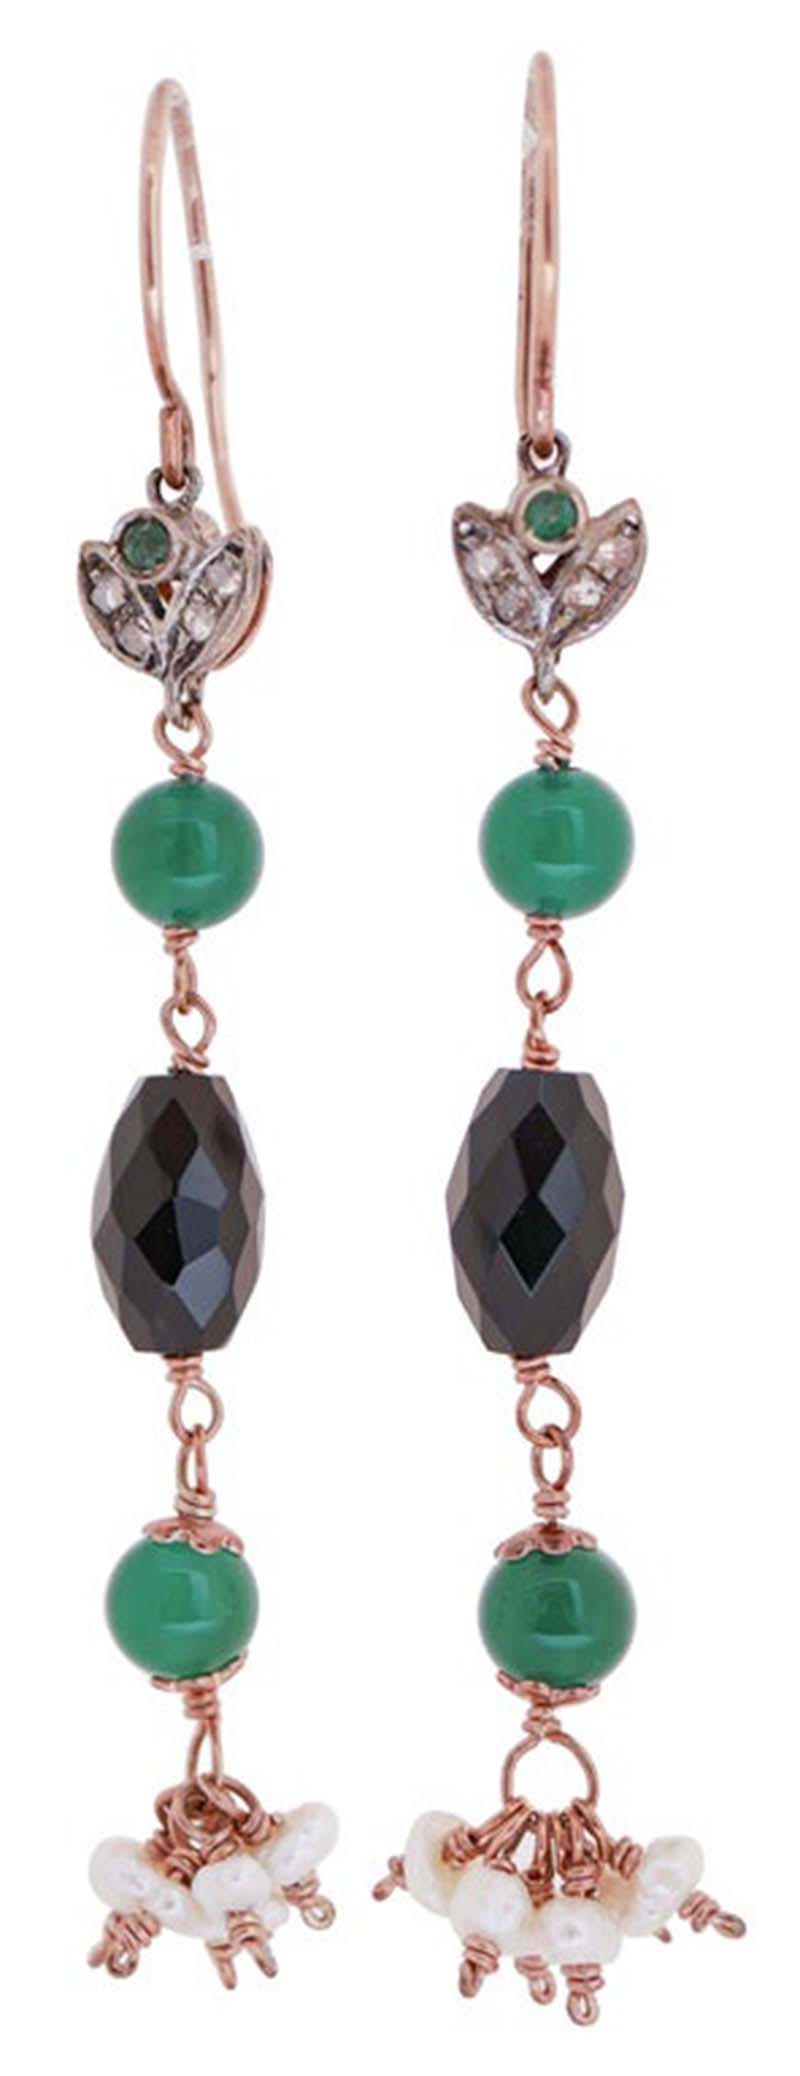 Green Agate, Onyx, Emeralds, Diamonds, Pearls, Rose Gold and Silver Earrings.